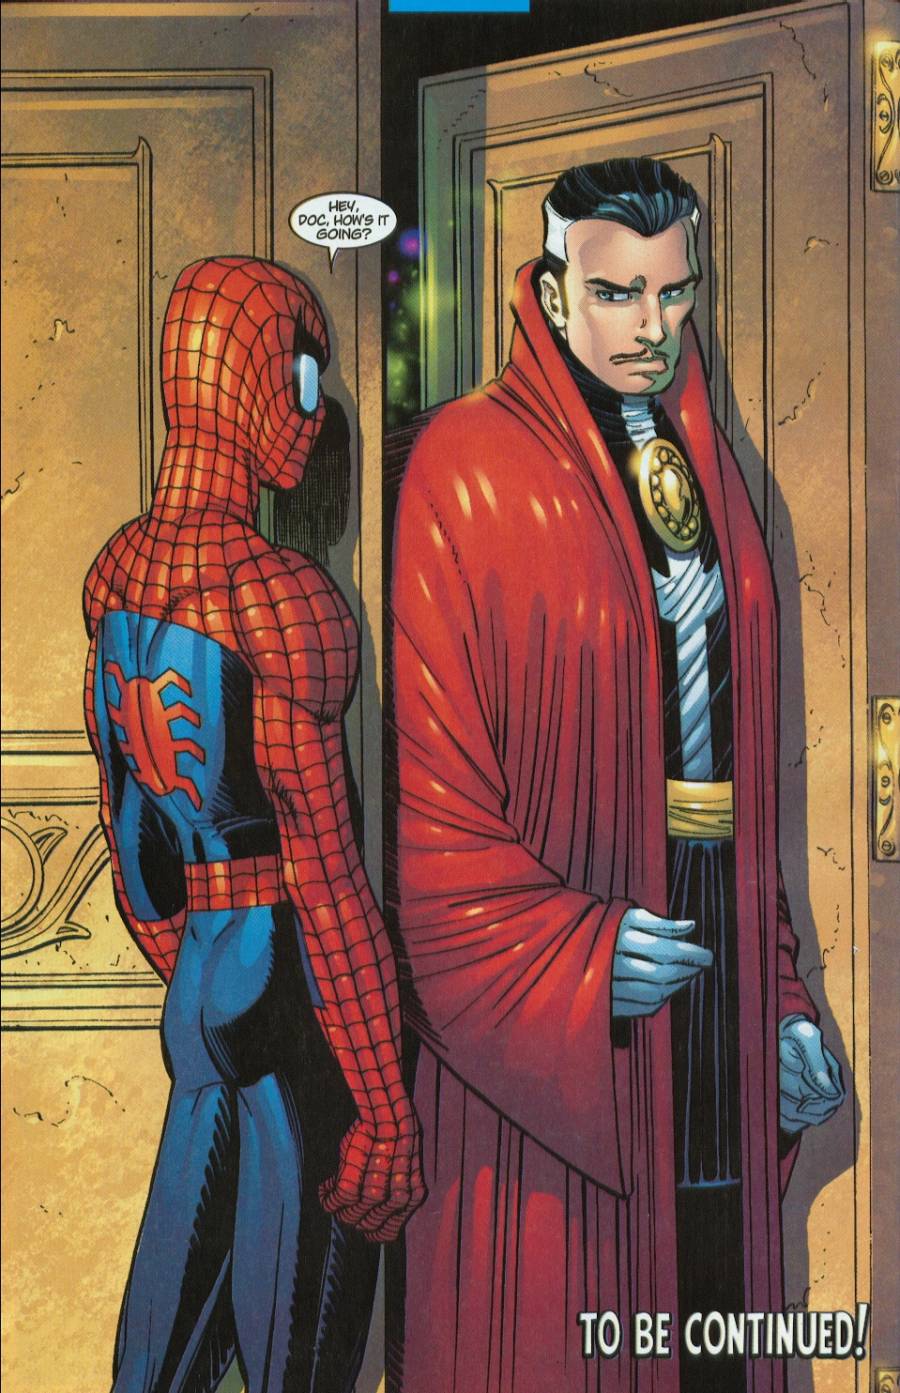 The final page of Amazing Spider-Man Volume 2 #41 with Spider-Man meeting Doctor Strange as illustrated by John Romita Jr.